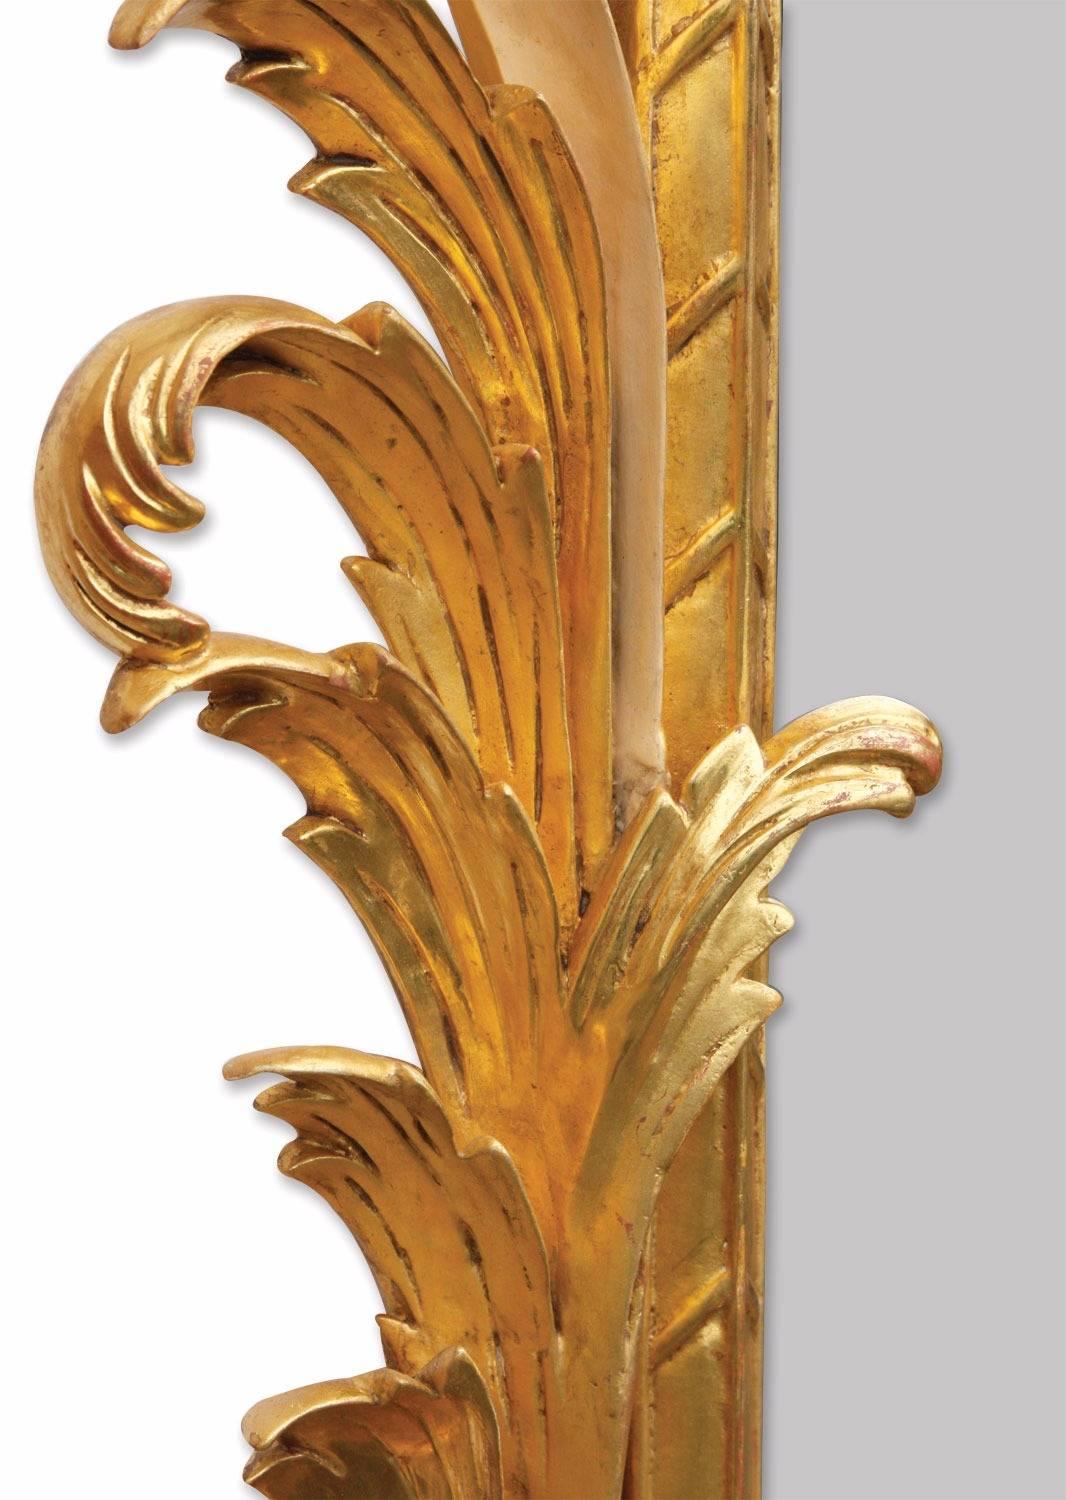 A giltwood wall mirror after an original from our archives originating from Biggs of Maidenhead run by our family. Entirely hand-carved in mahogany and water gilded in 23¾ carat gold leaf, toned with a ‘bright and matte’ effect, the highlighted